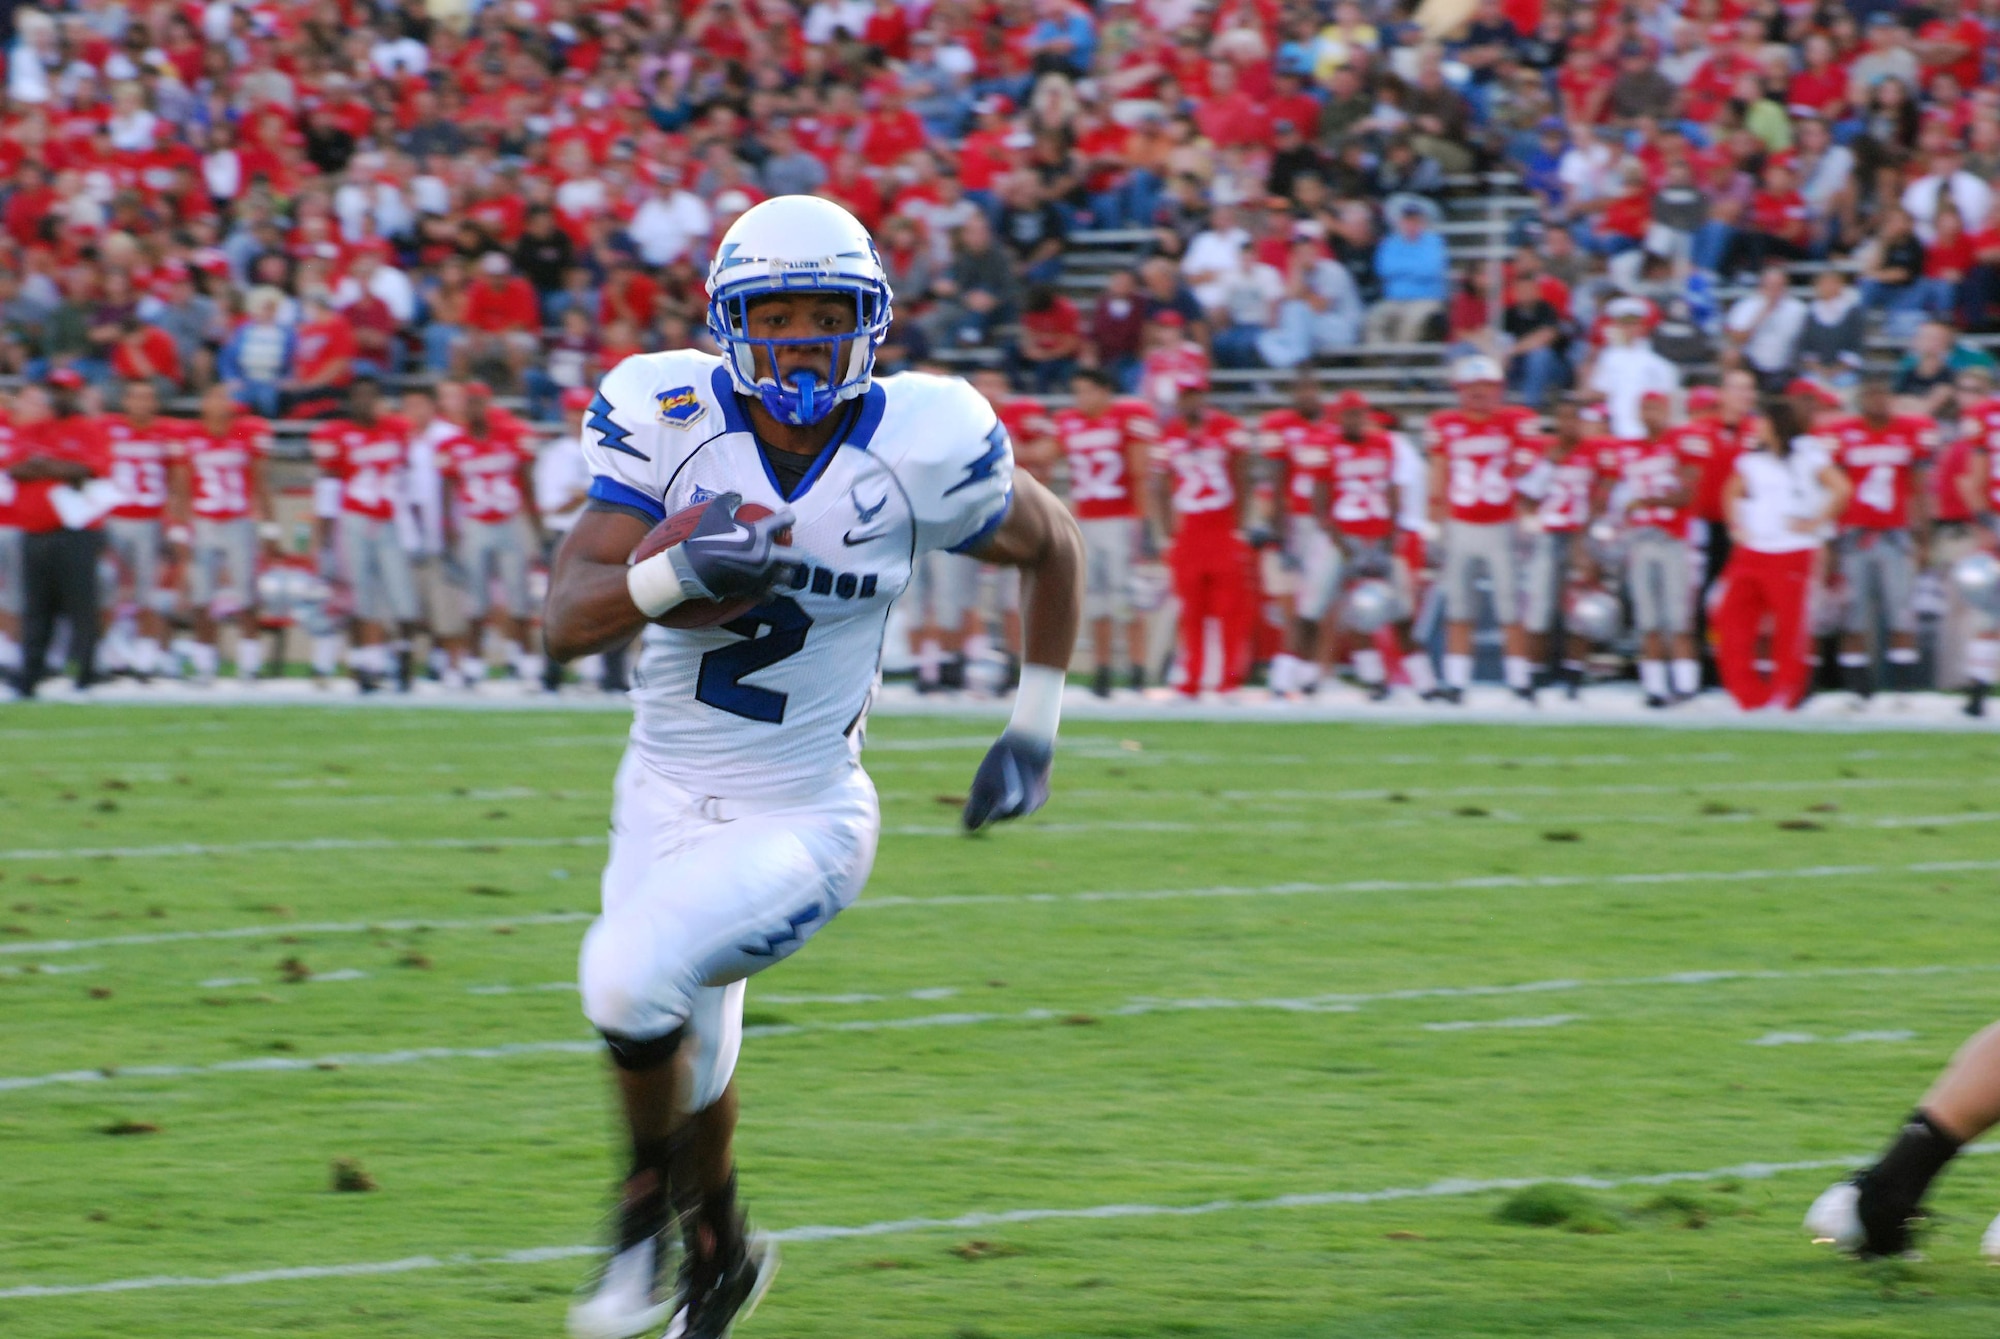 U.S. Air Force Academy junior running back Savier Stephens races to the corner to score on a 6-yard run and put the Falcons up 23-0 during football action Sept. 19, 2009, at Albuquerque, N.M. (U.S. Air Force photo/Denise Navoy)